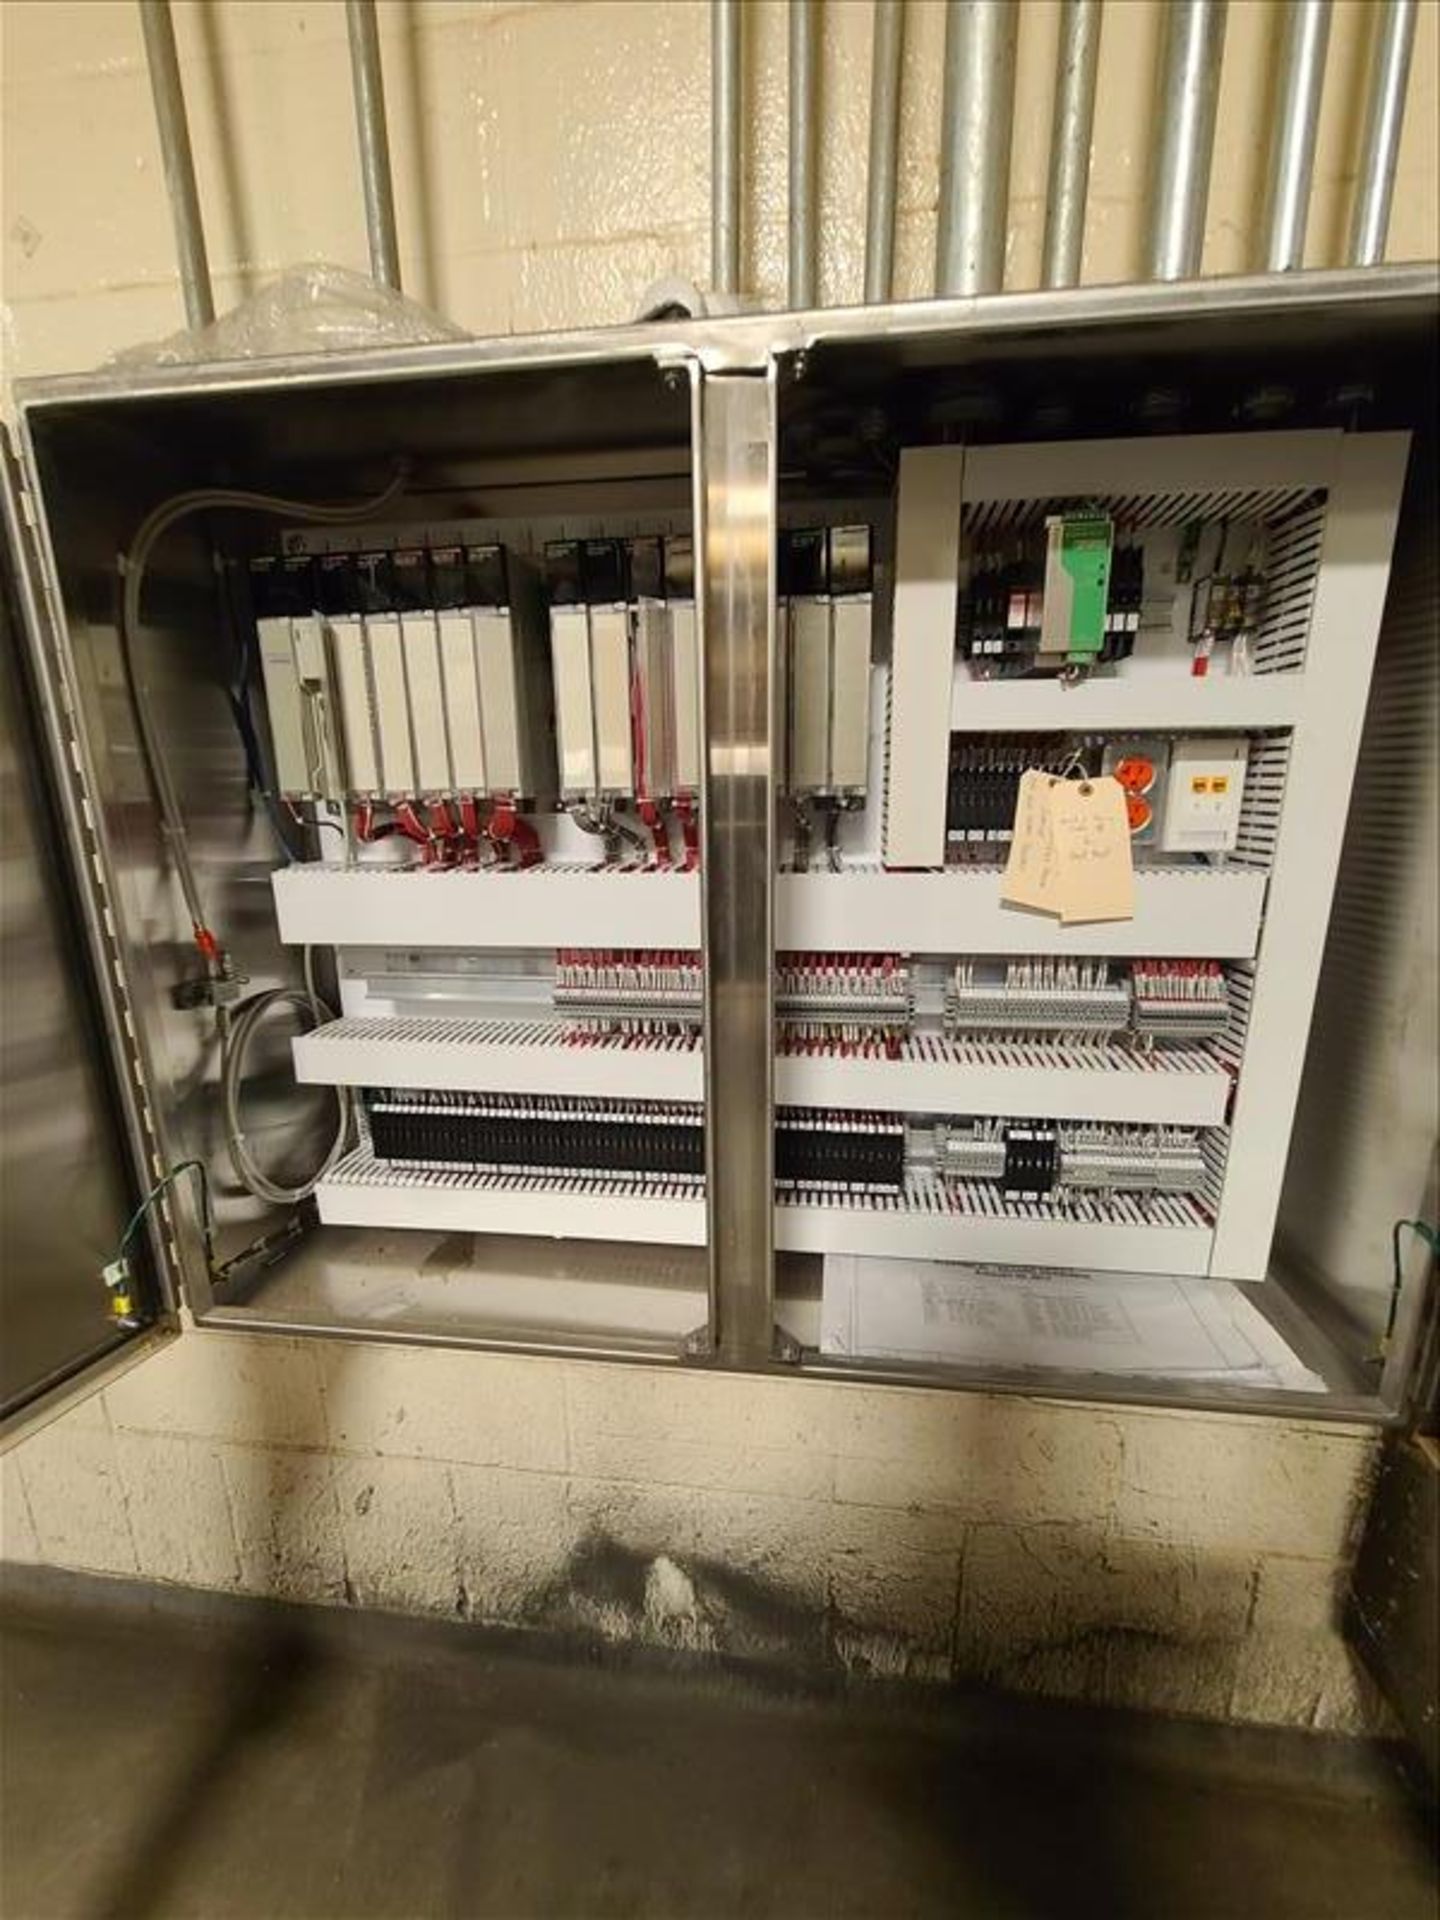 [LOT] (3) stainless control cabinet, with CPS114-20 DAO 842, CRA931-00 AV03000, DAI54300 ALO02000 - Image 4 of 8